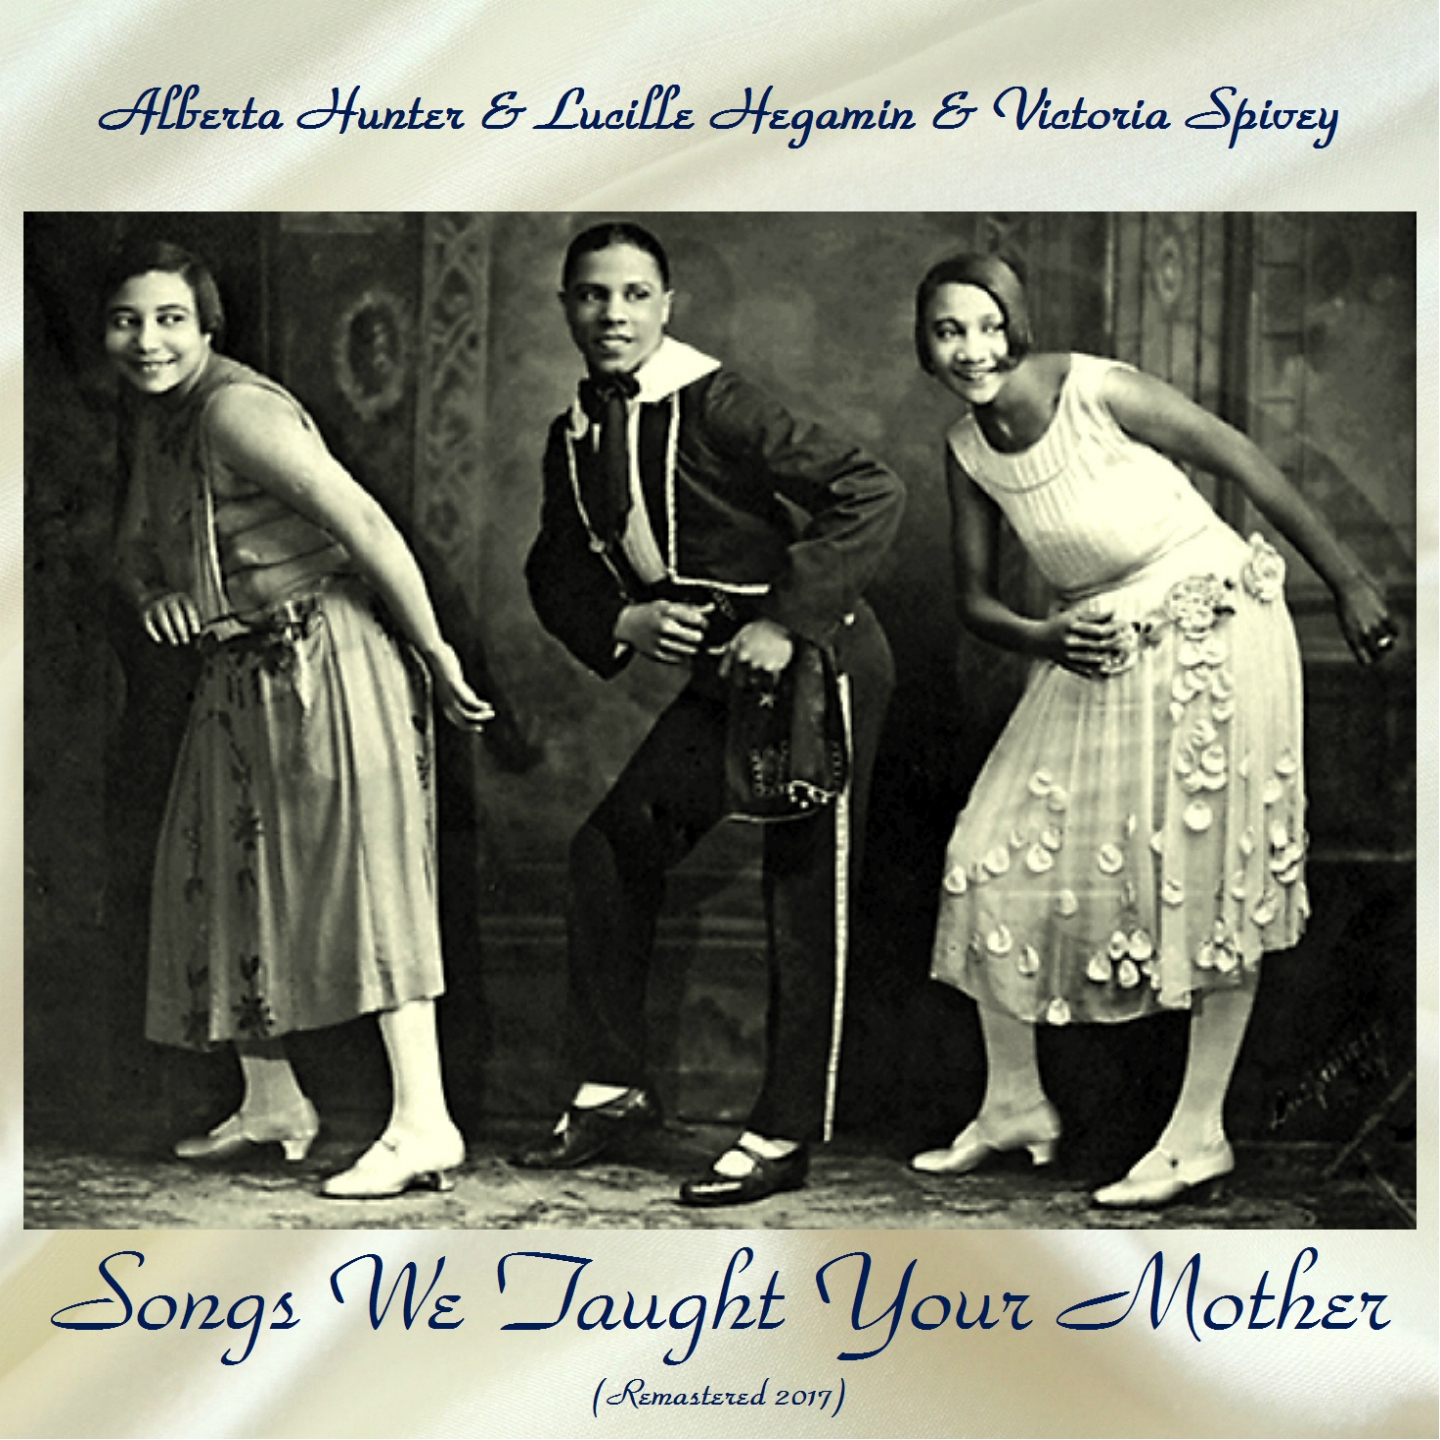 Songs We Taught Your Mother